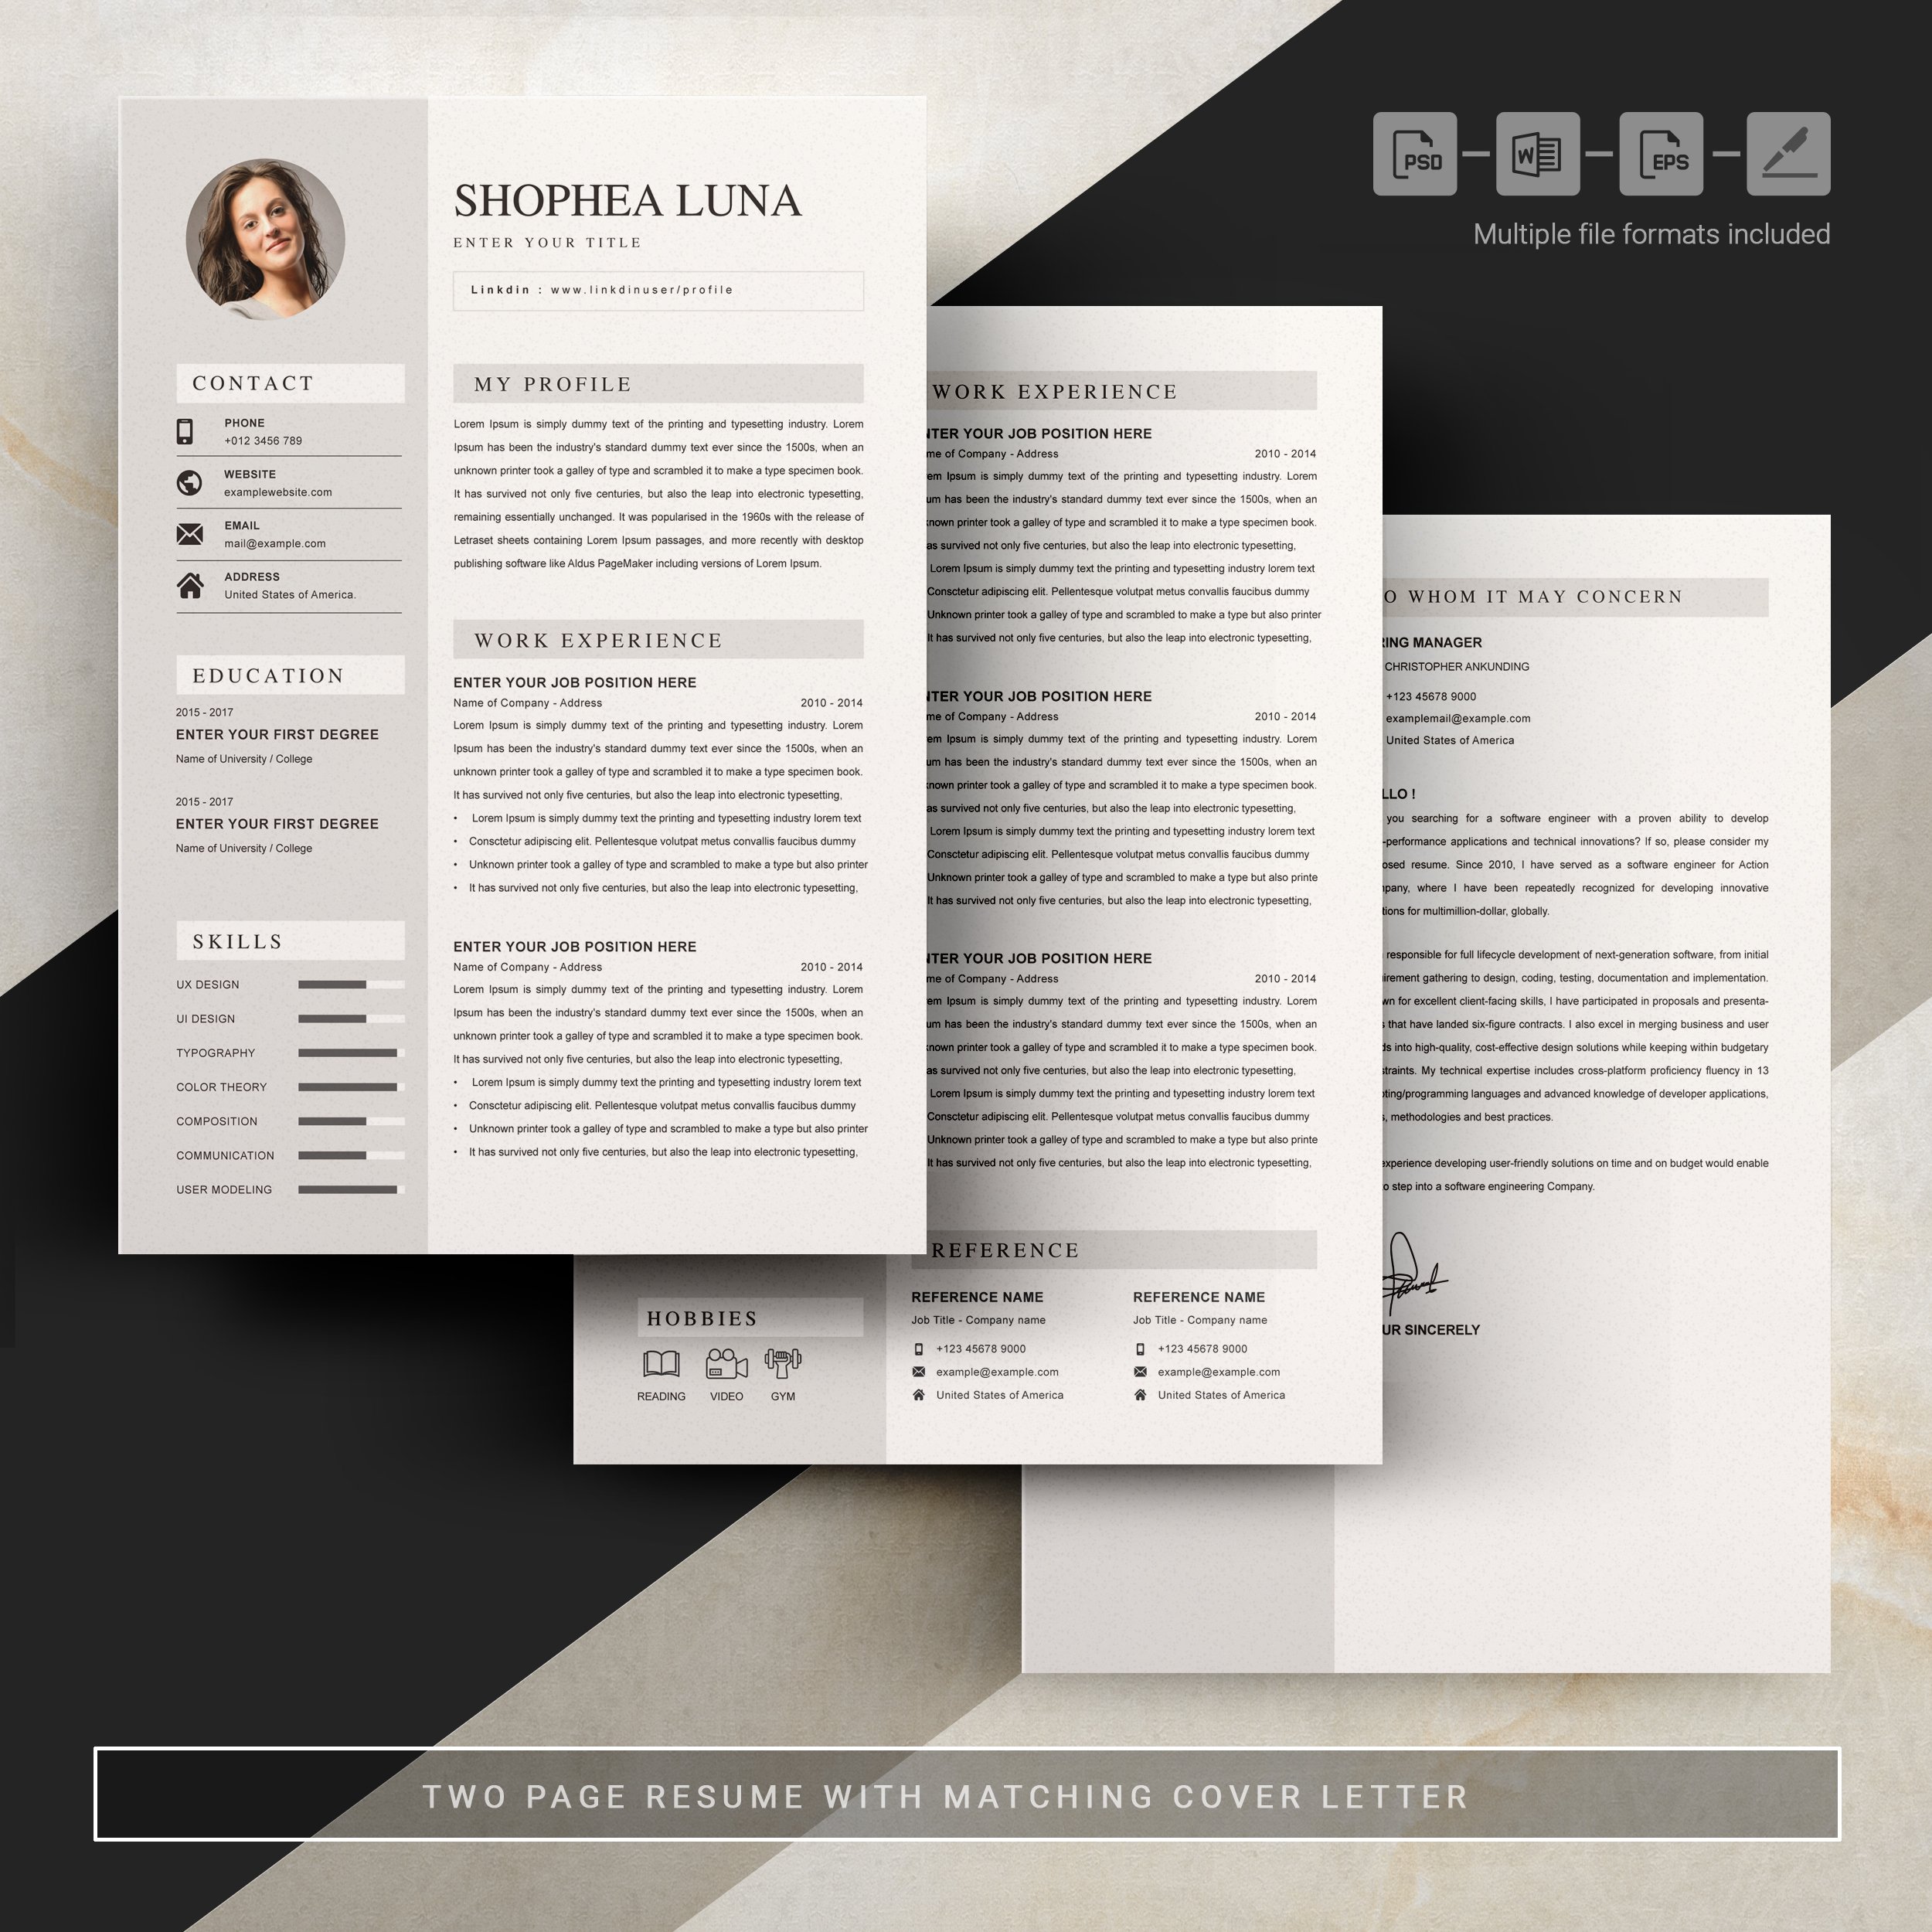 05 3 pages free resume design template 829